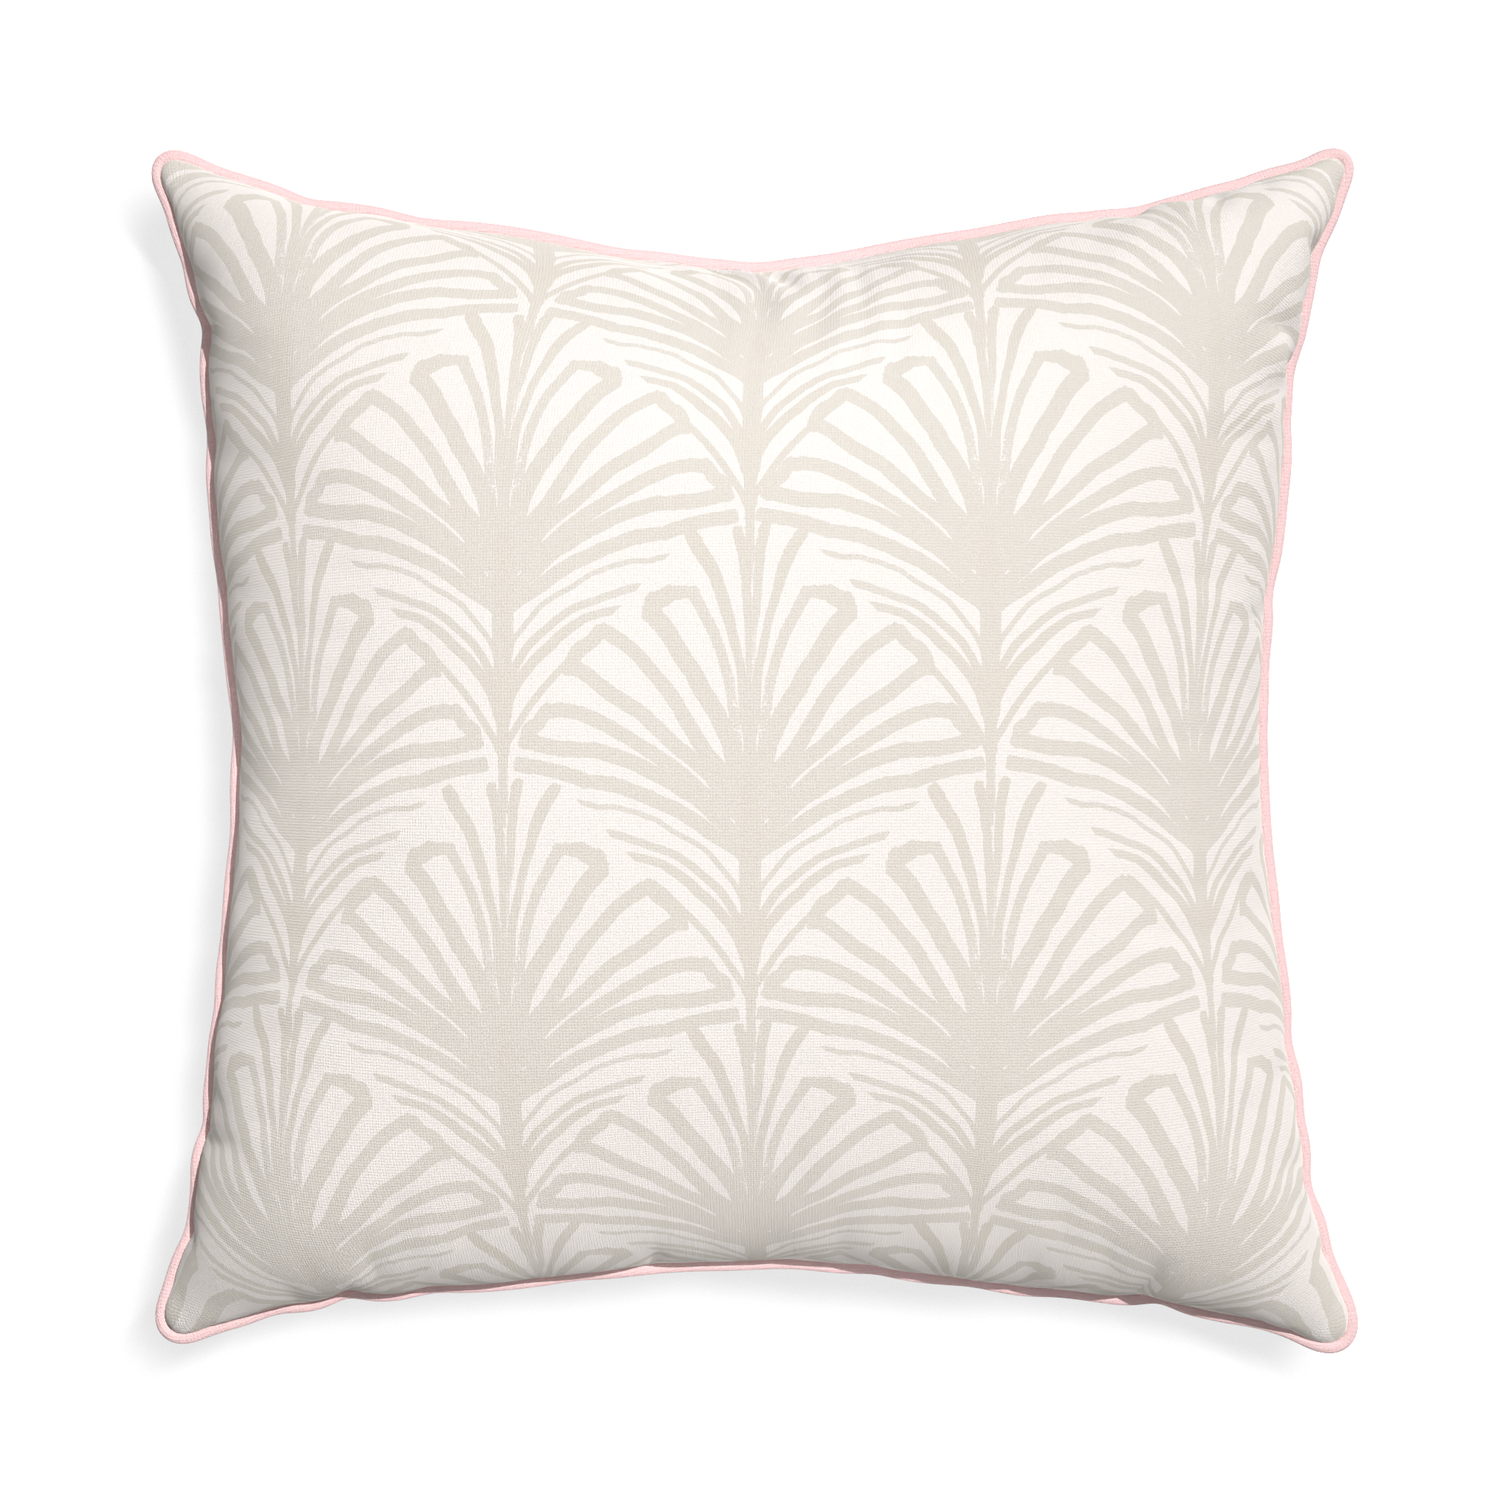 Euro-sham suzy sand custom pillow with petal piping on white background